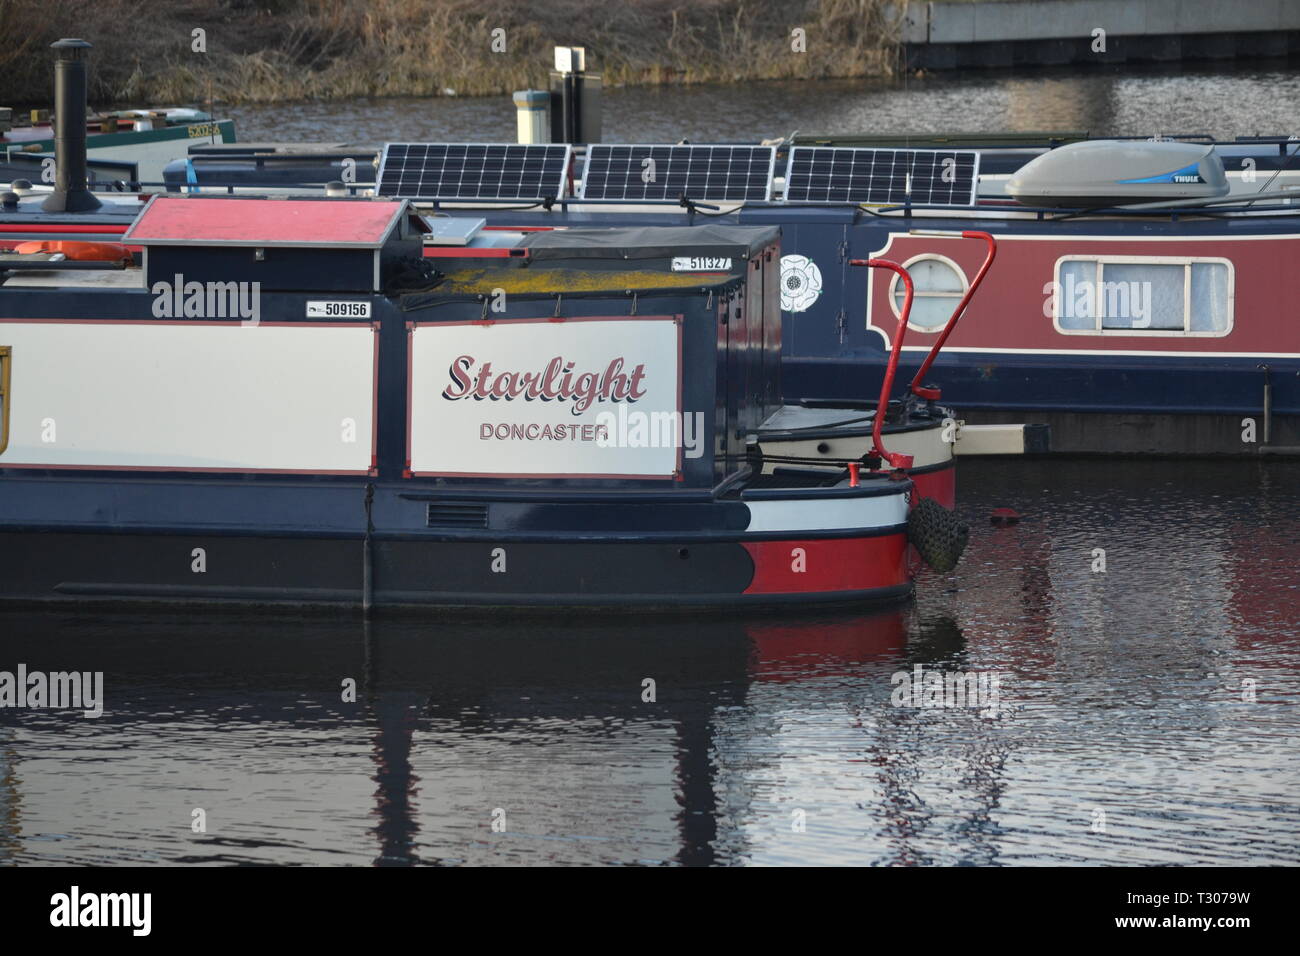 Barges on the Doncaster Canal - 1 Named Starlight - Yorkshire UK Stock Photo